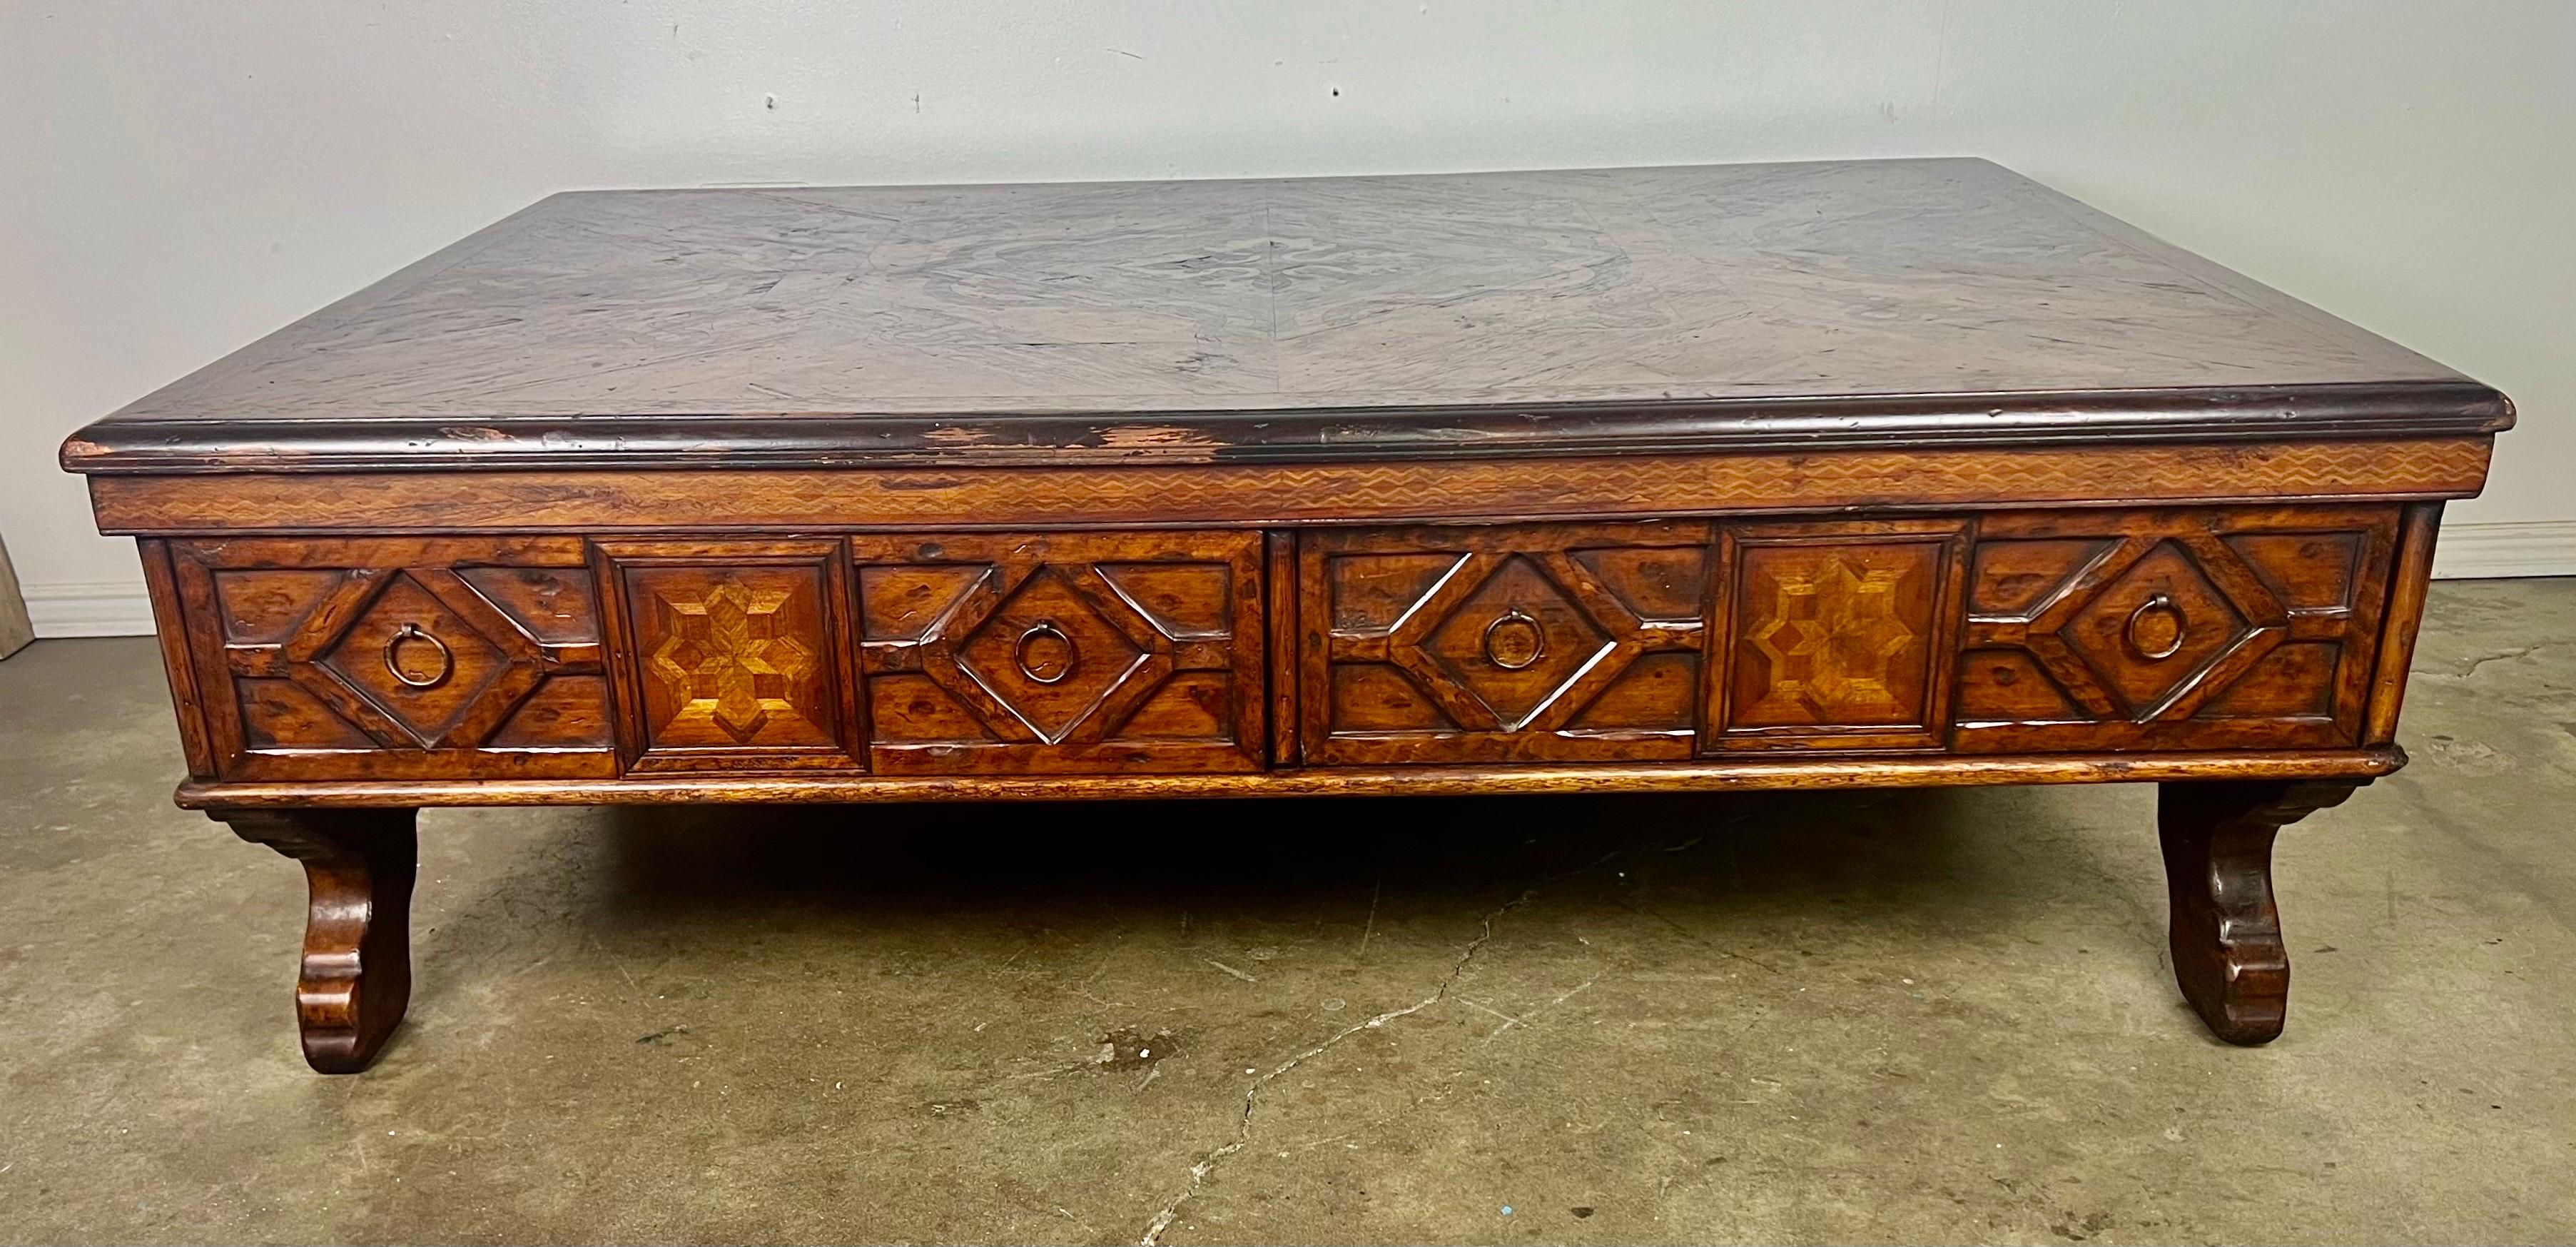 Monumental Spanish Inlaid Coffee Table w/ Drawers In Good Condition For Sale In Los Angeles, CA